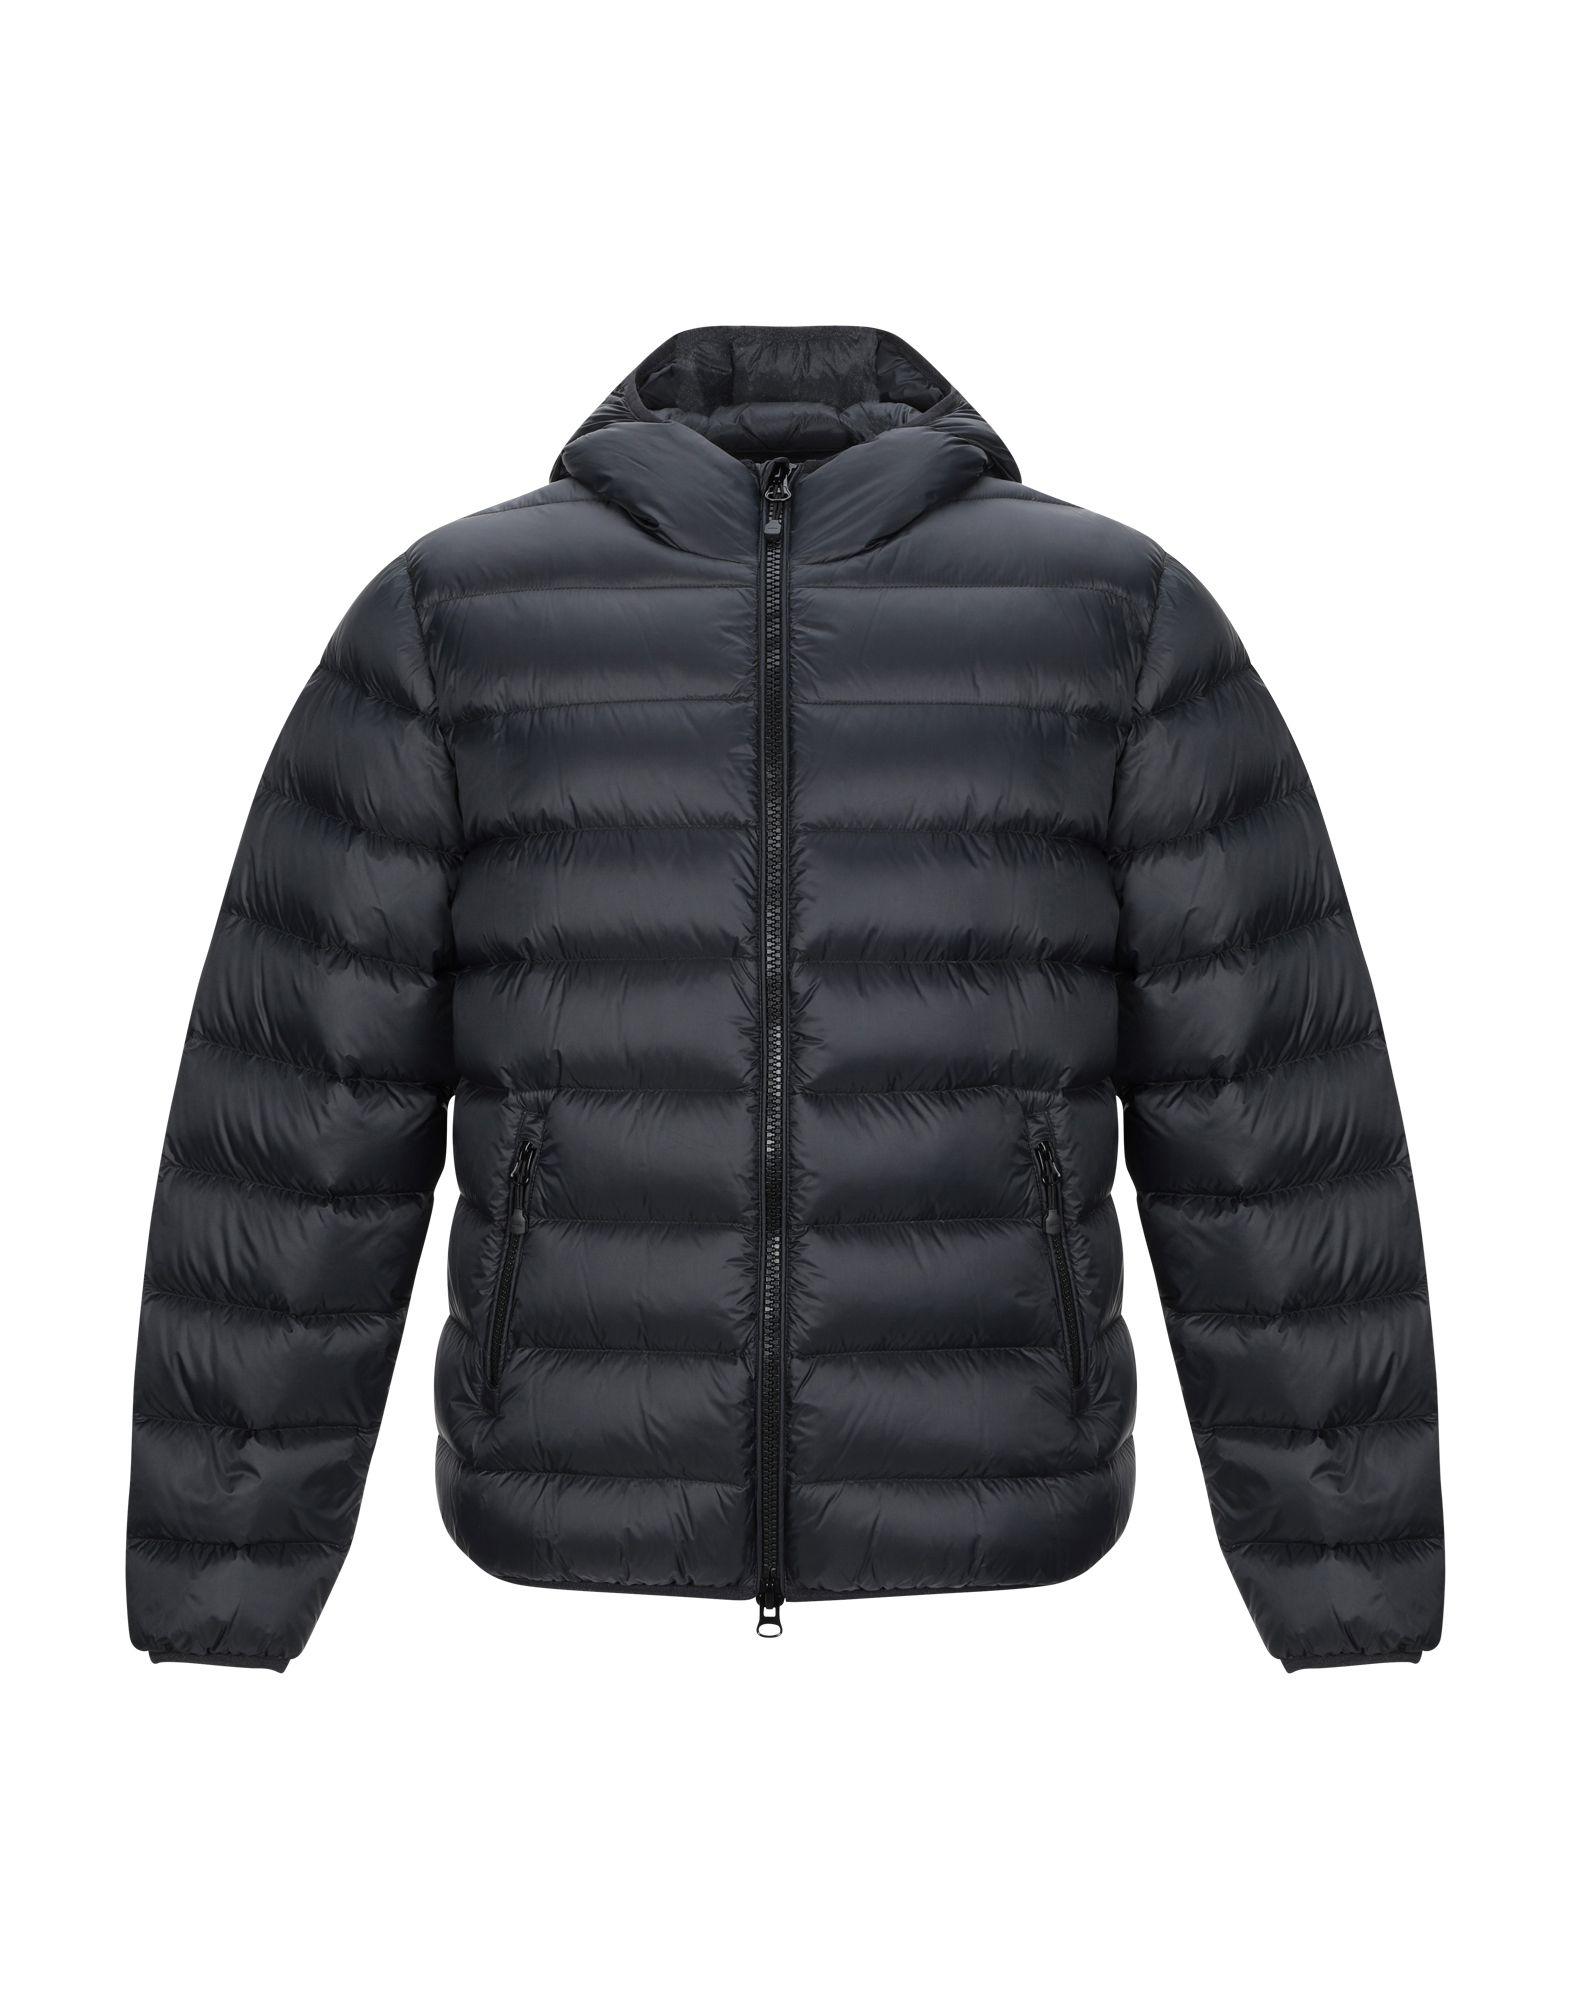 Mauro Grifoni Down Jacket in Black for Men - Lyst